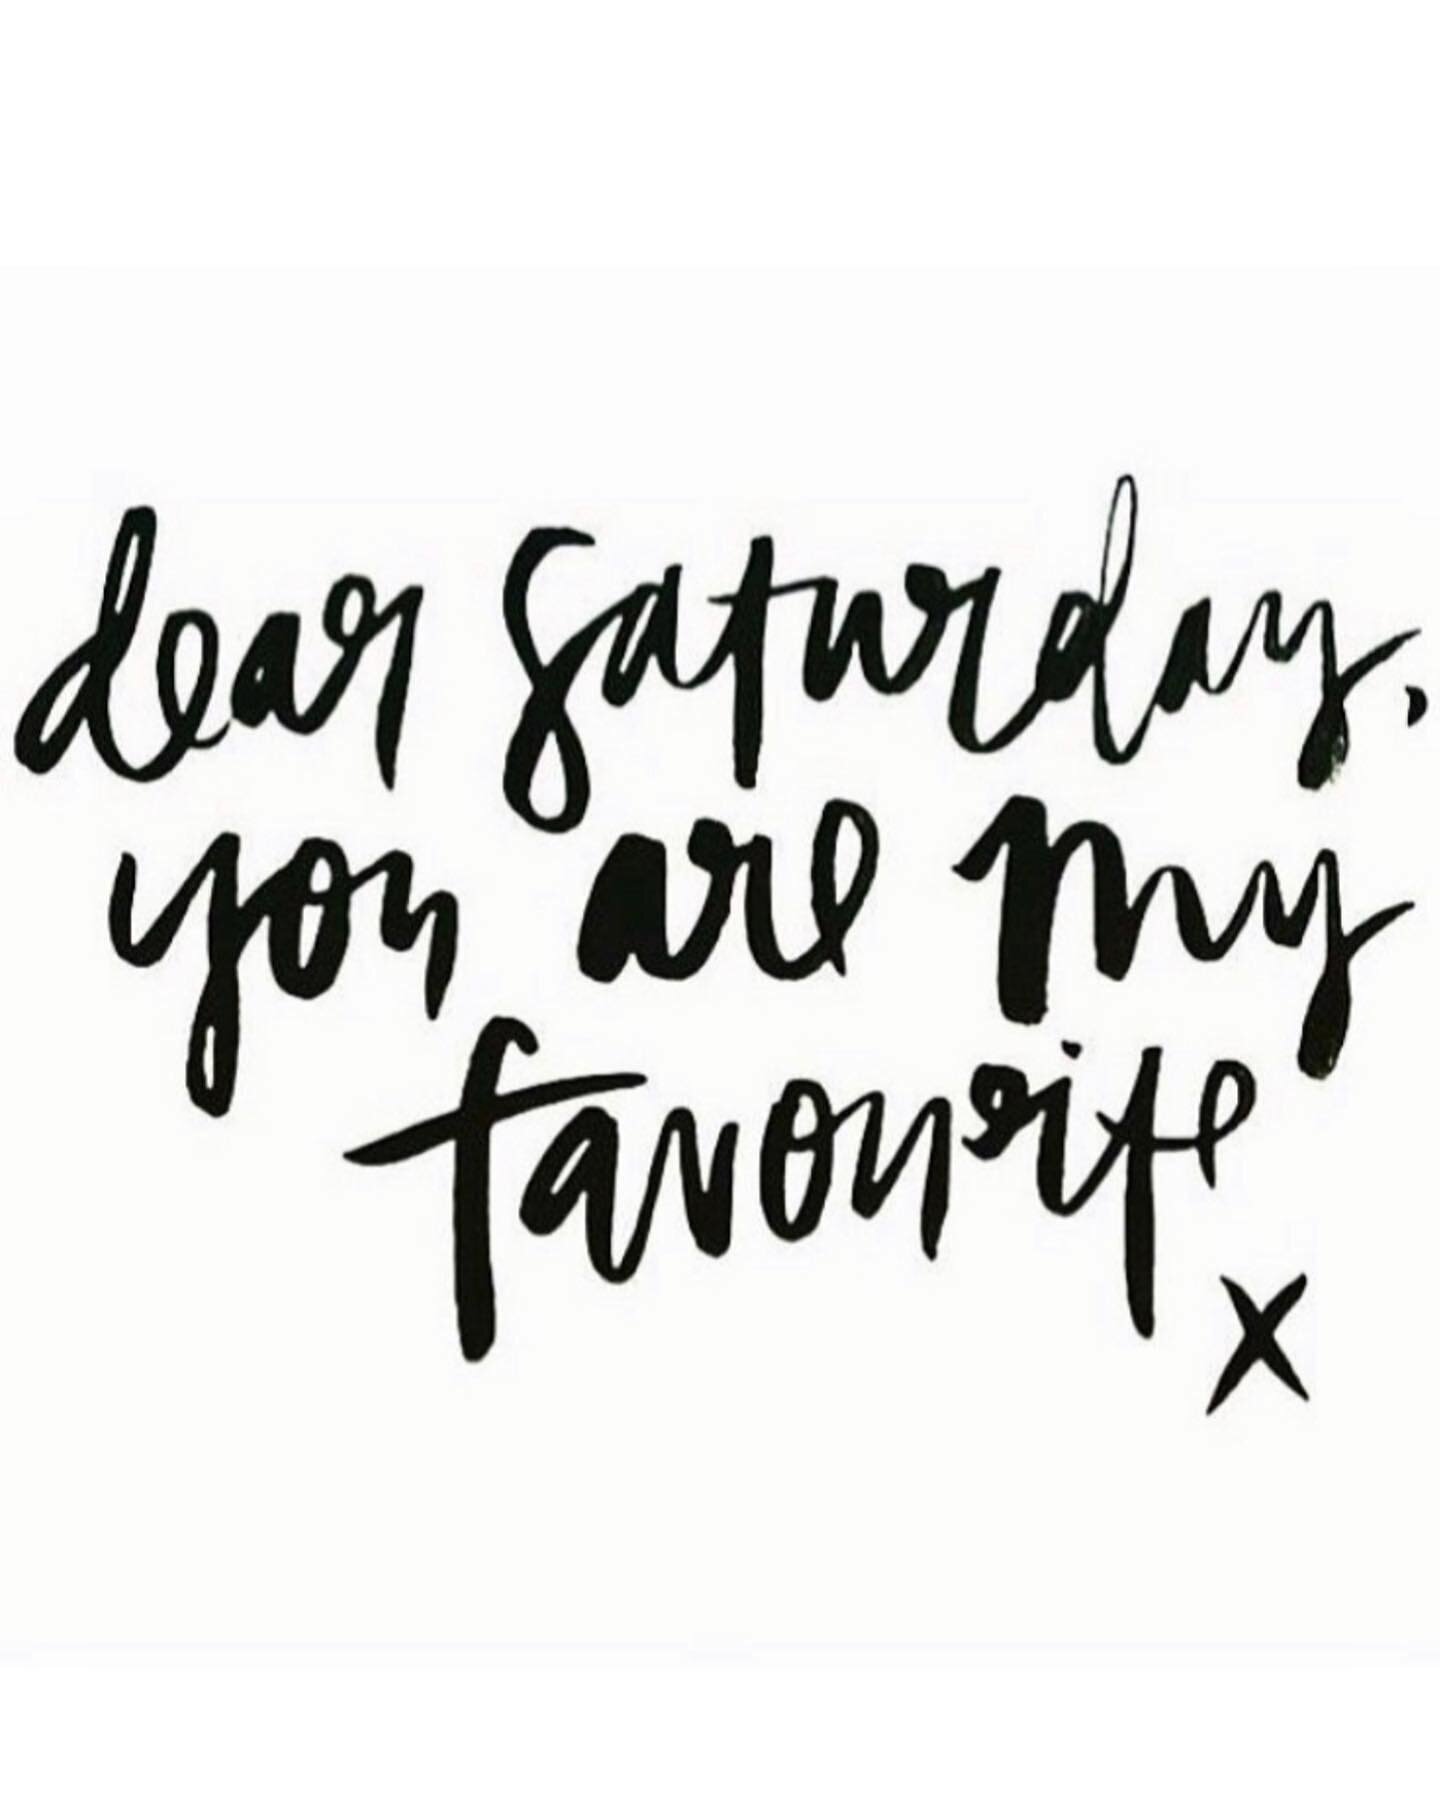 .
An excellent day to go
RUG SHOPPING !!
▪️
#saturday 
#weekend
#day
#work
#play
#entertain
#chill
#catchup
#shop
#outdoorrugs
#mats
#doormats
#bathmats
#doormats
#shopfrontrugs
▪️
▪️
www.theshopfrontcollection.com.au